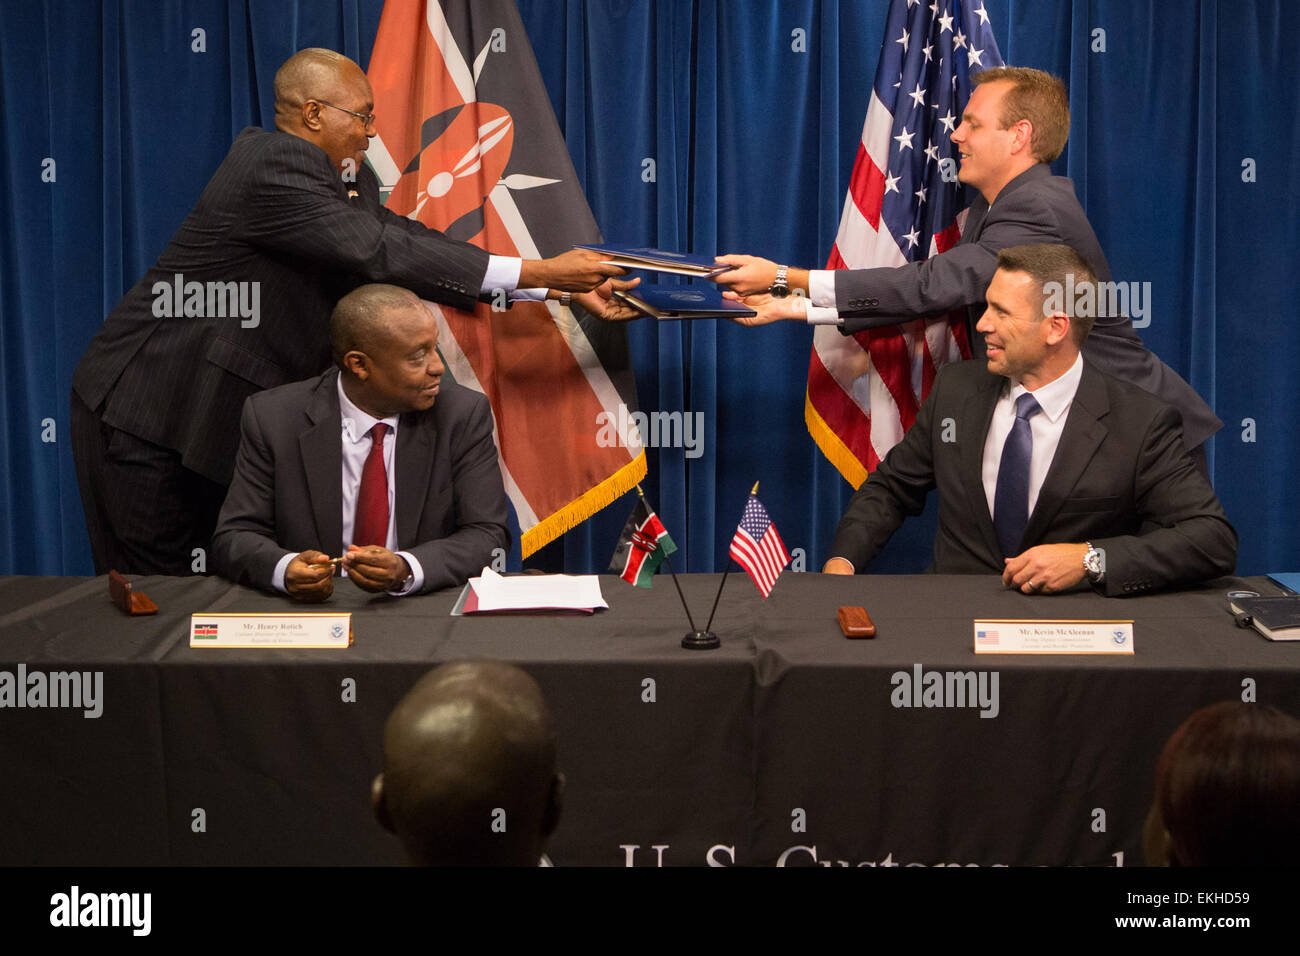 Mr. Henry Rotich, Cabinet Member of the Treasury, Republic of Kenya (left) and Mr. Kevin McAleenan, Acting Deputy Commissioner, Customs and Border Protection (right) sign a Customs Mutual Assistance Agreement at a ceremony in Washington D.C. photos by James Tourtellotte Stock Photo